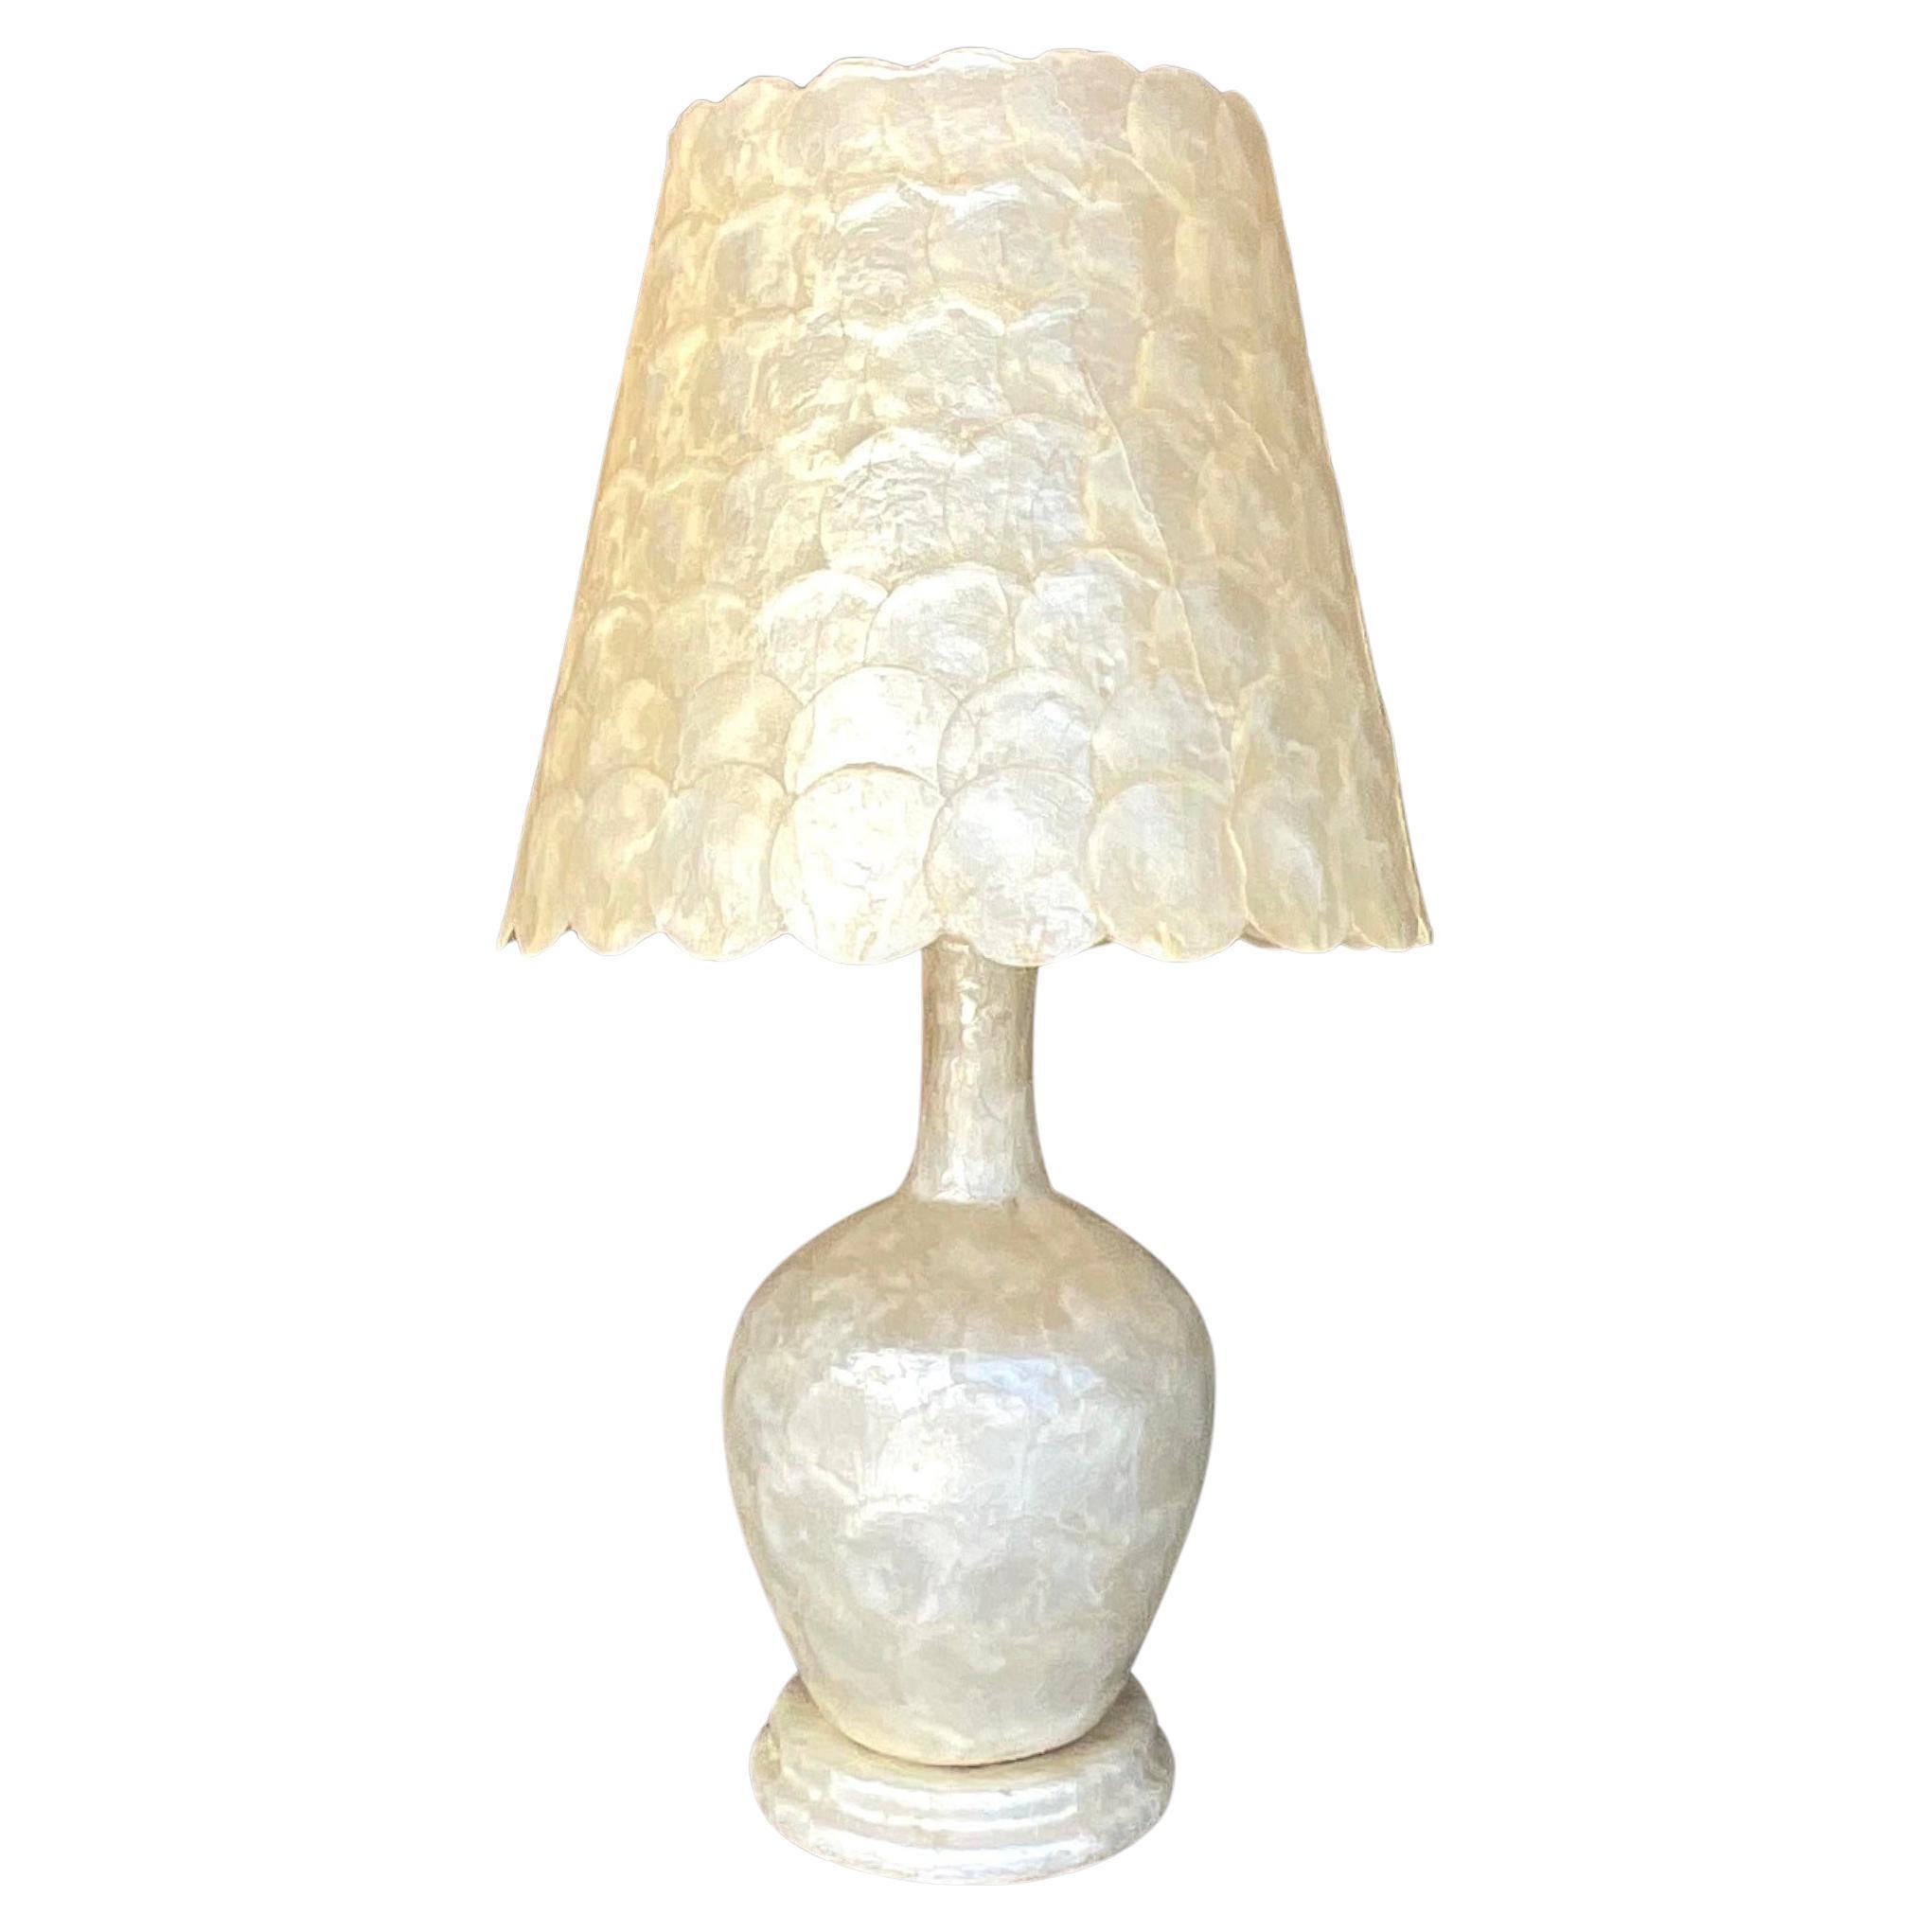 Vintage Coastal Capiz Shell Gourd Lamp With Coordinating Shade